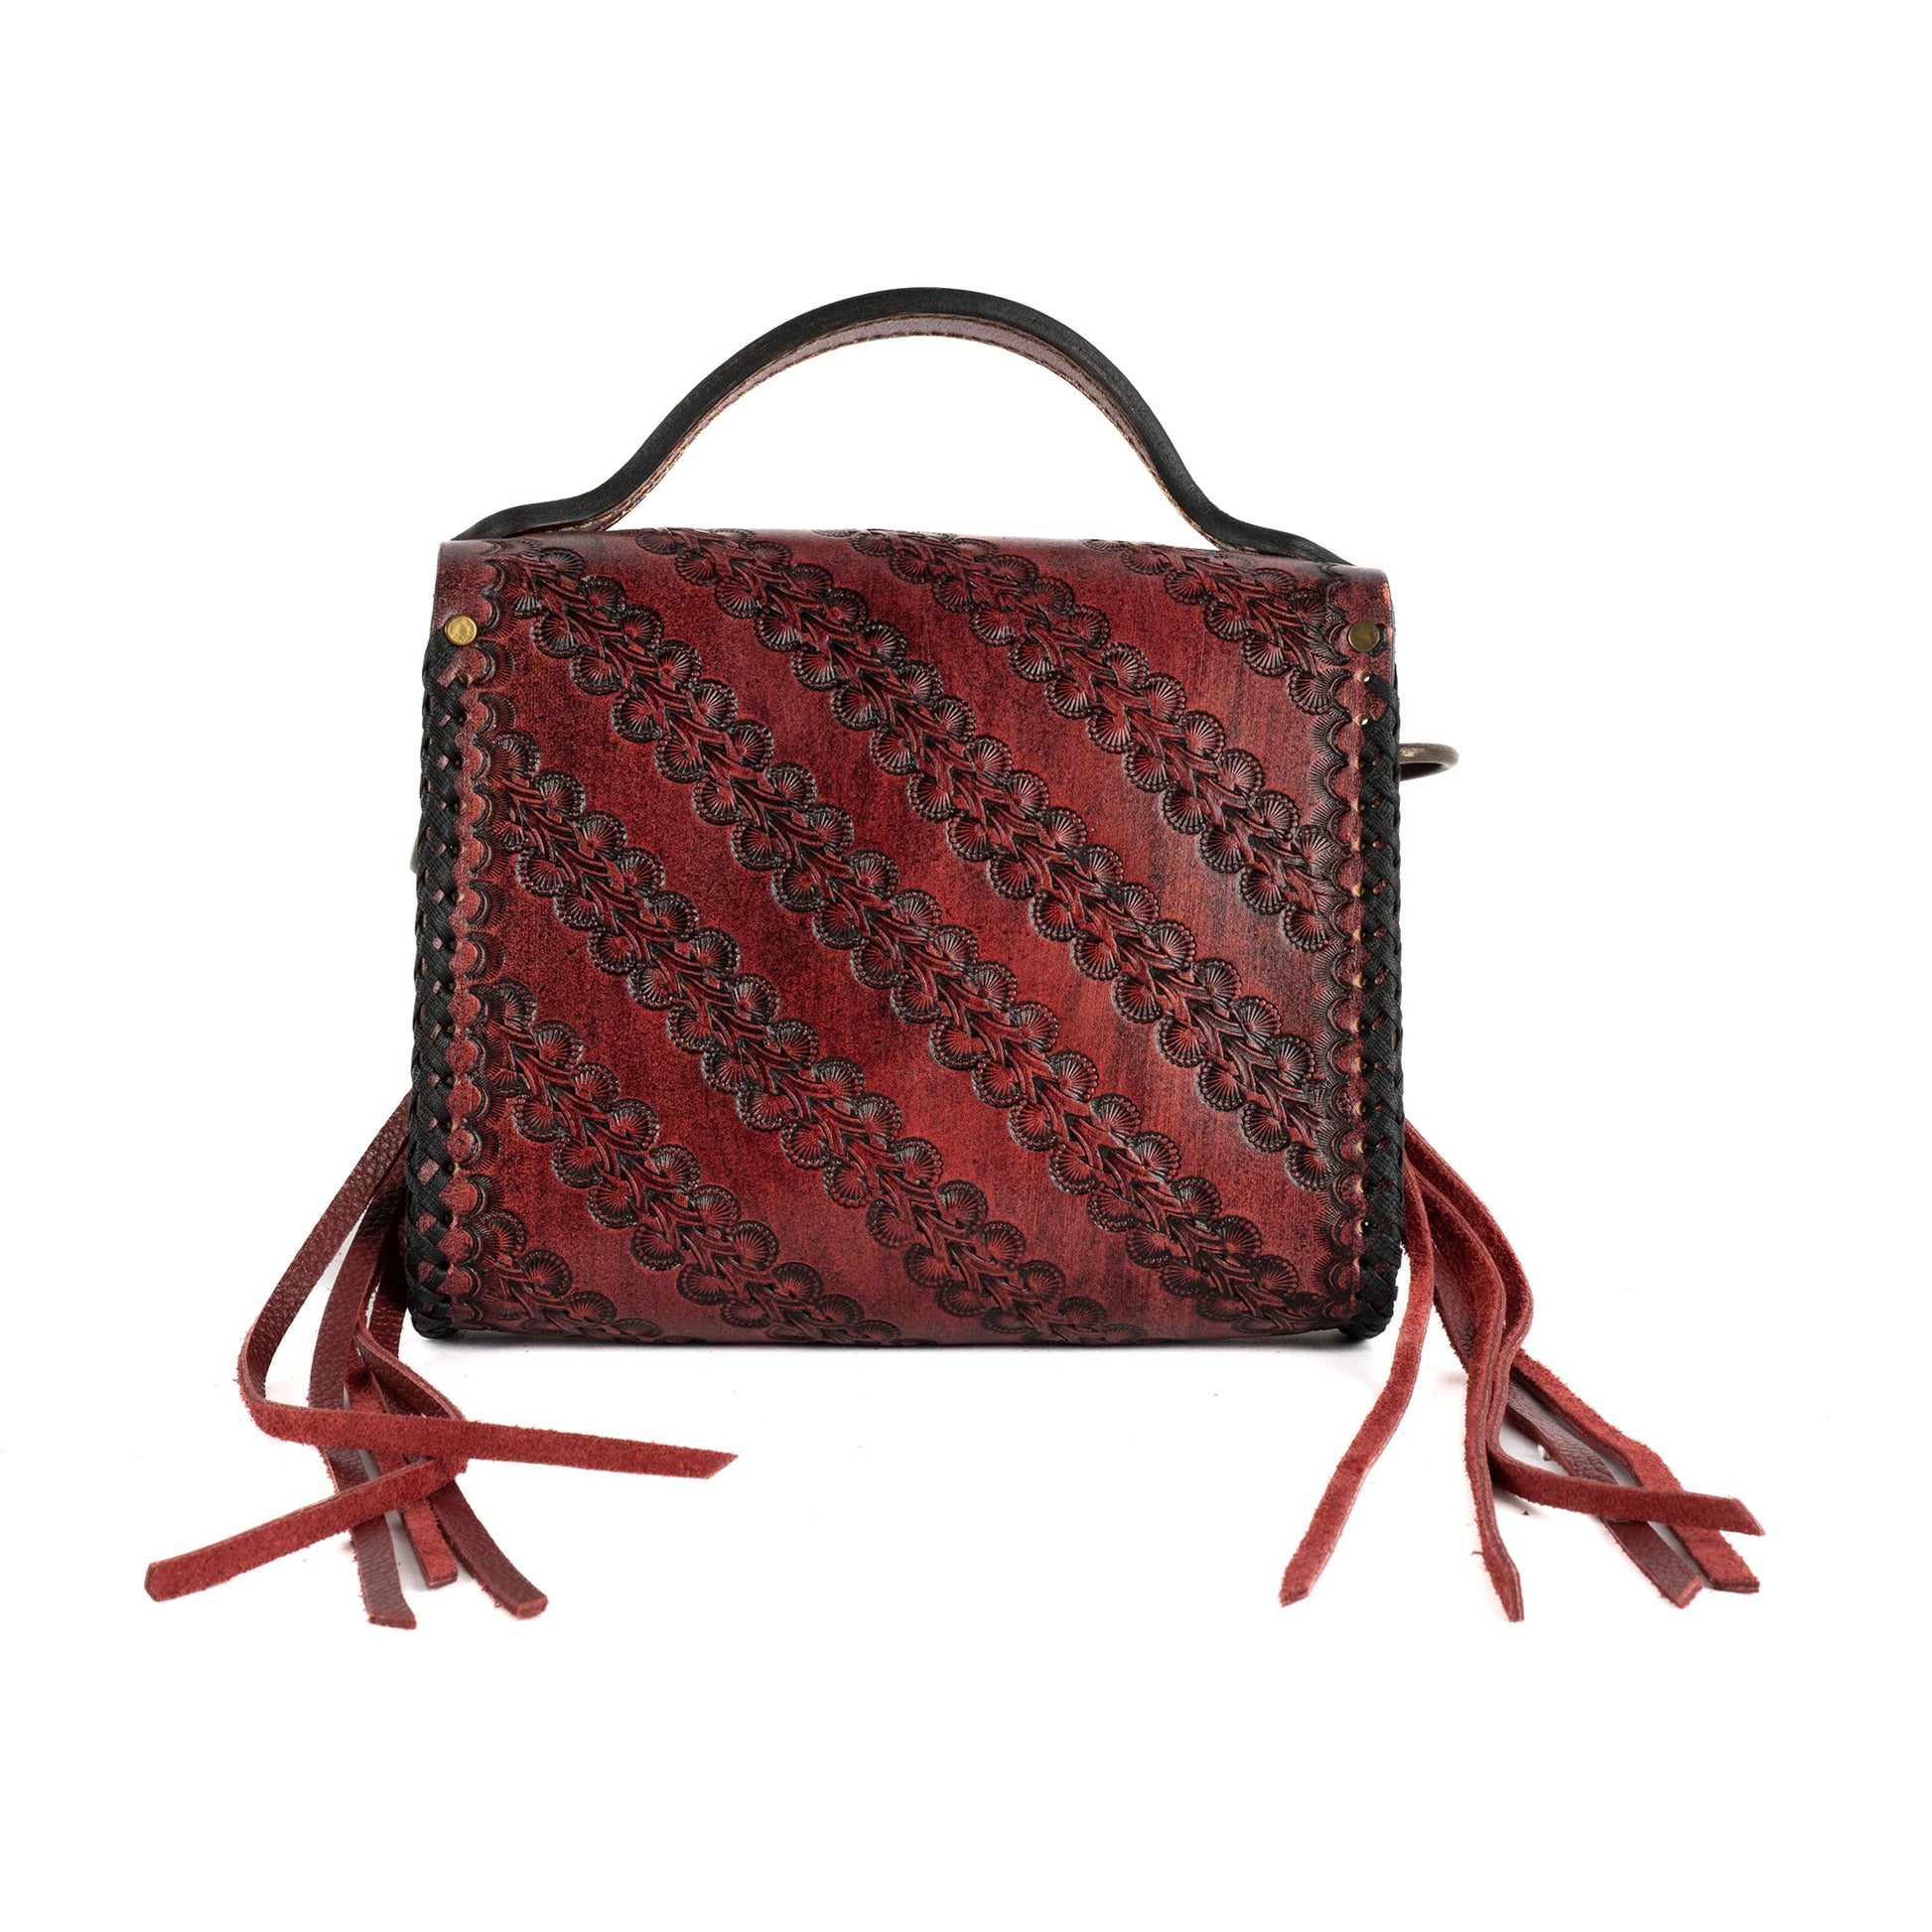 Victoria Red Leather Carved & Crafted Hand Bag - Handbags Zengoda Shop online from Artisan Brands